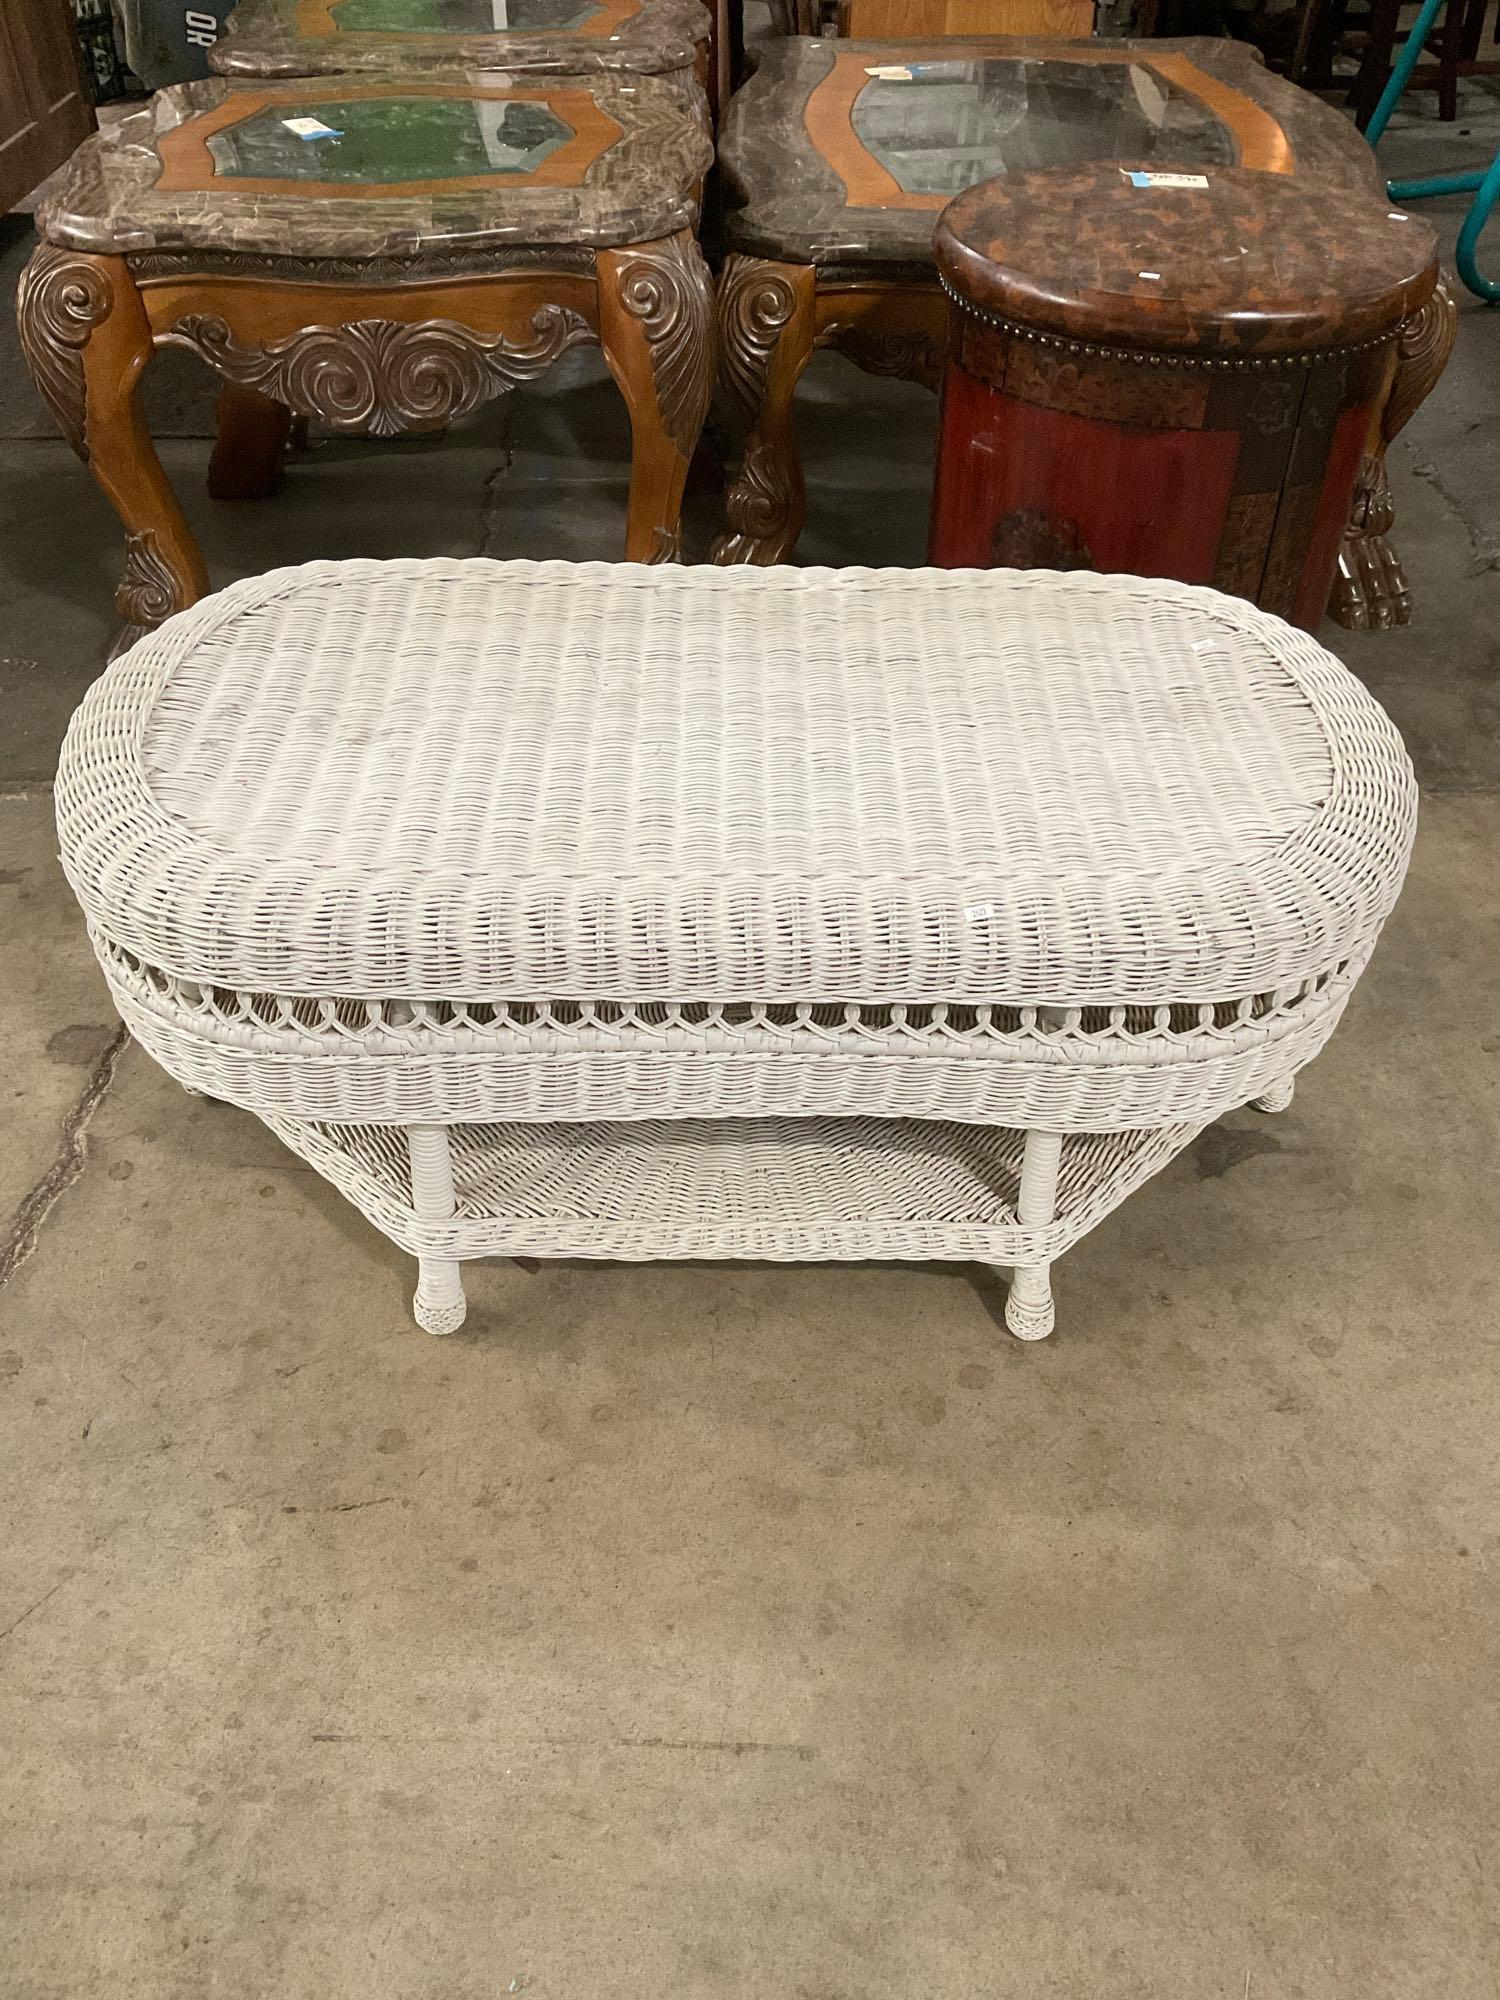 Vintage White Wicker Patio Coffee Table w/ 2 Tiers & Unique Shape. Measures 42.5" x 18" See pics.